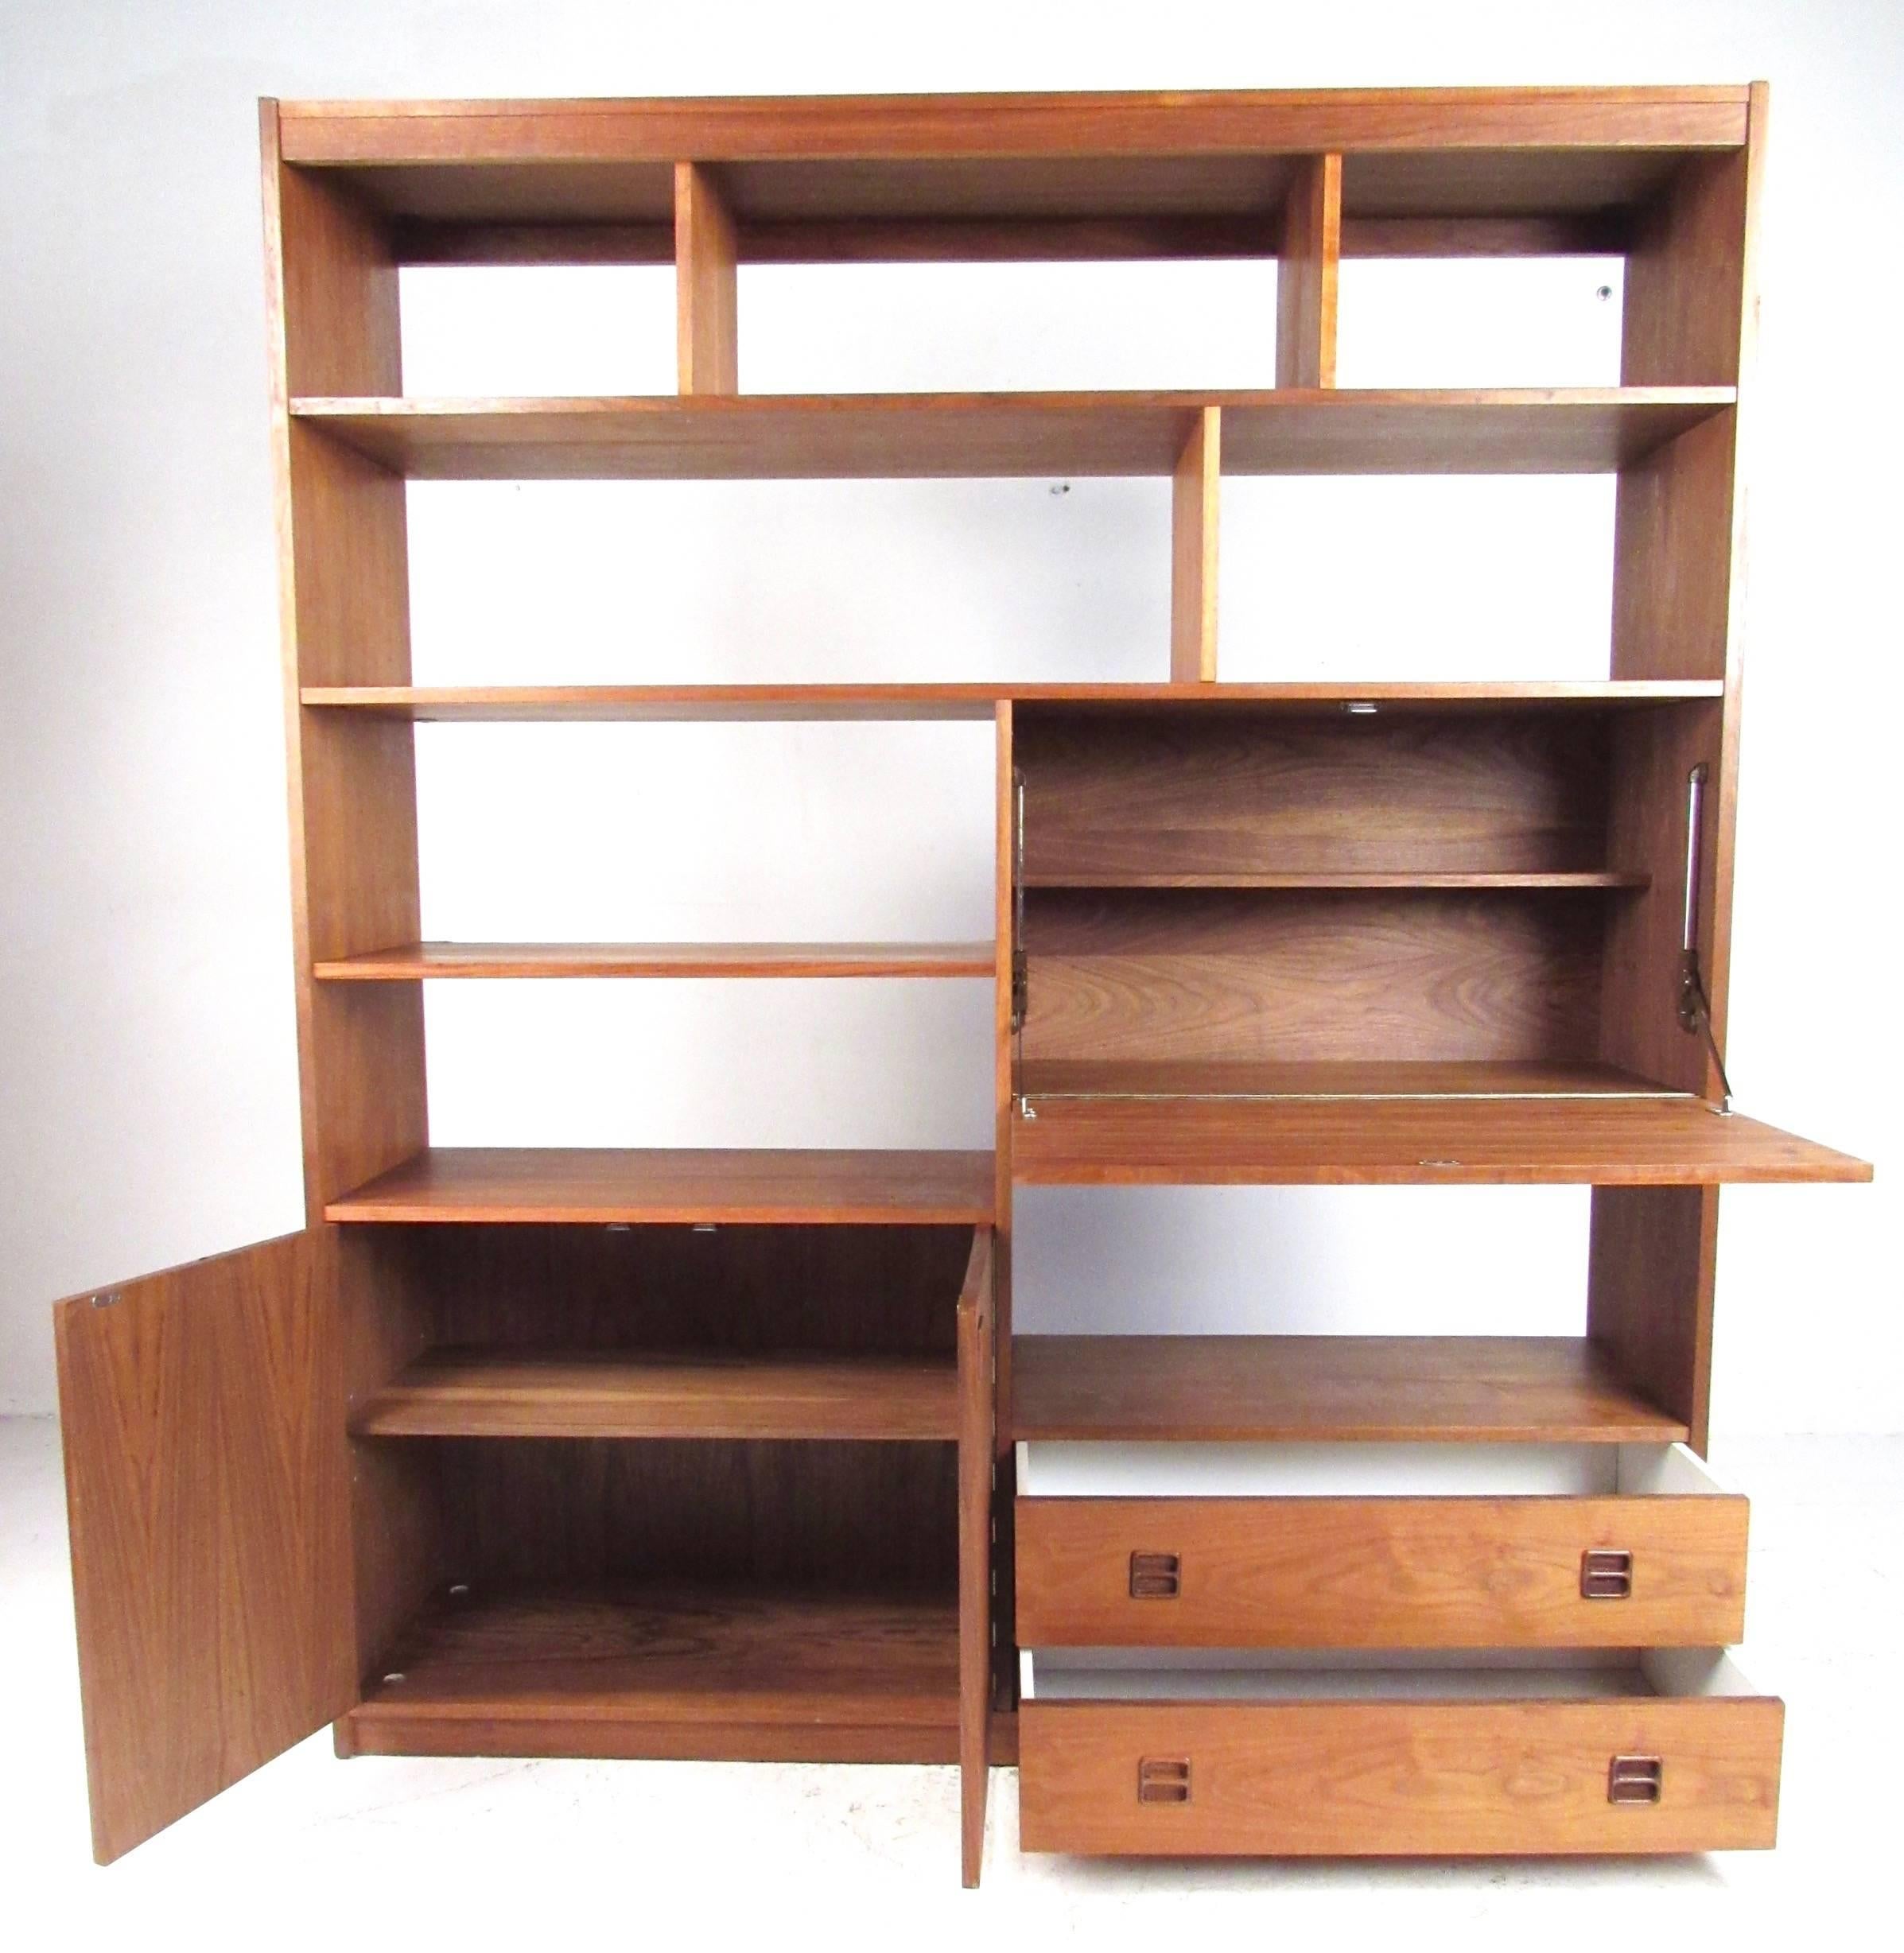 This beautiful midcentury wall unit features rich walnut finish and offers spacious storage options as well as a finished back. Adjustable shelves and spacious cabinets make this perfect for use as a bookcase, wall unit, or room divider, this pieces